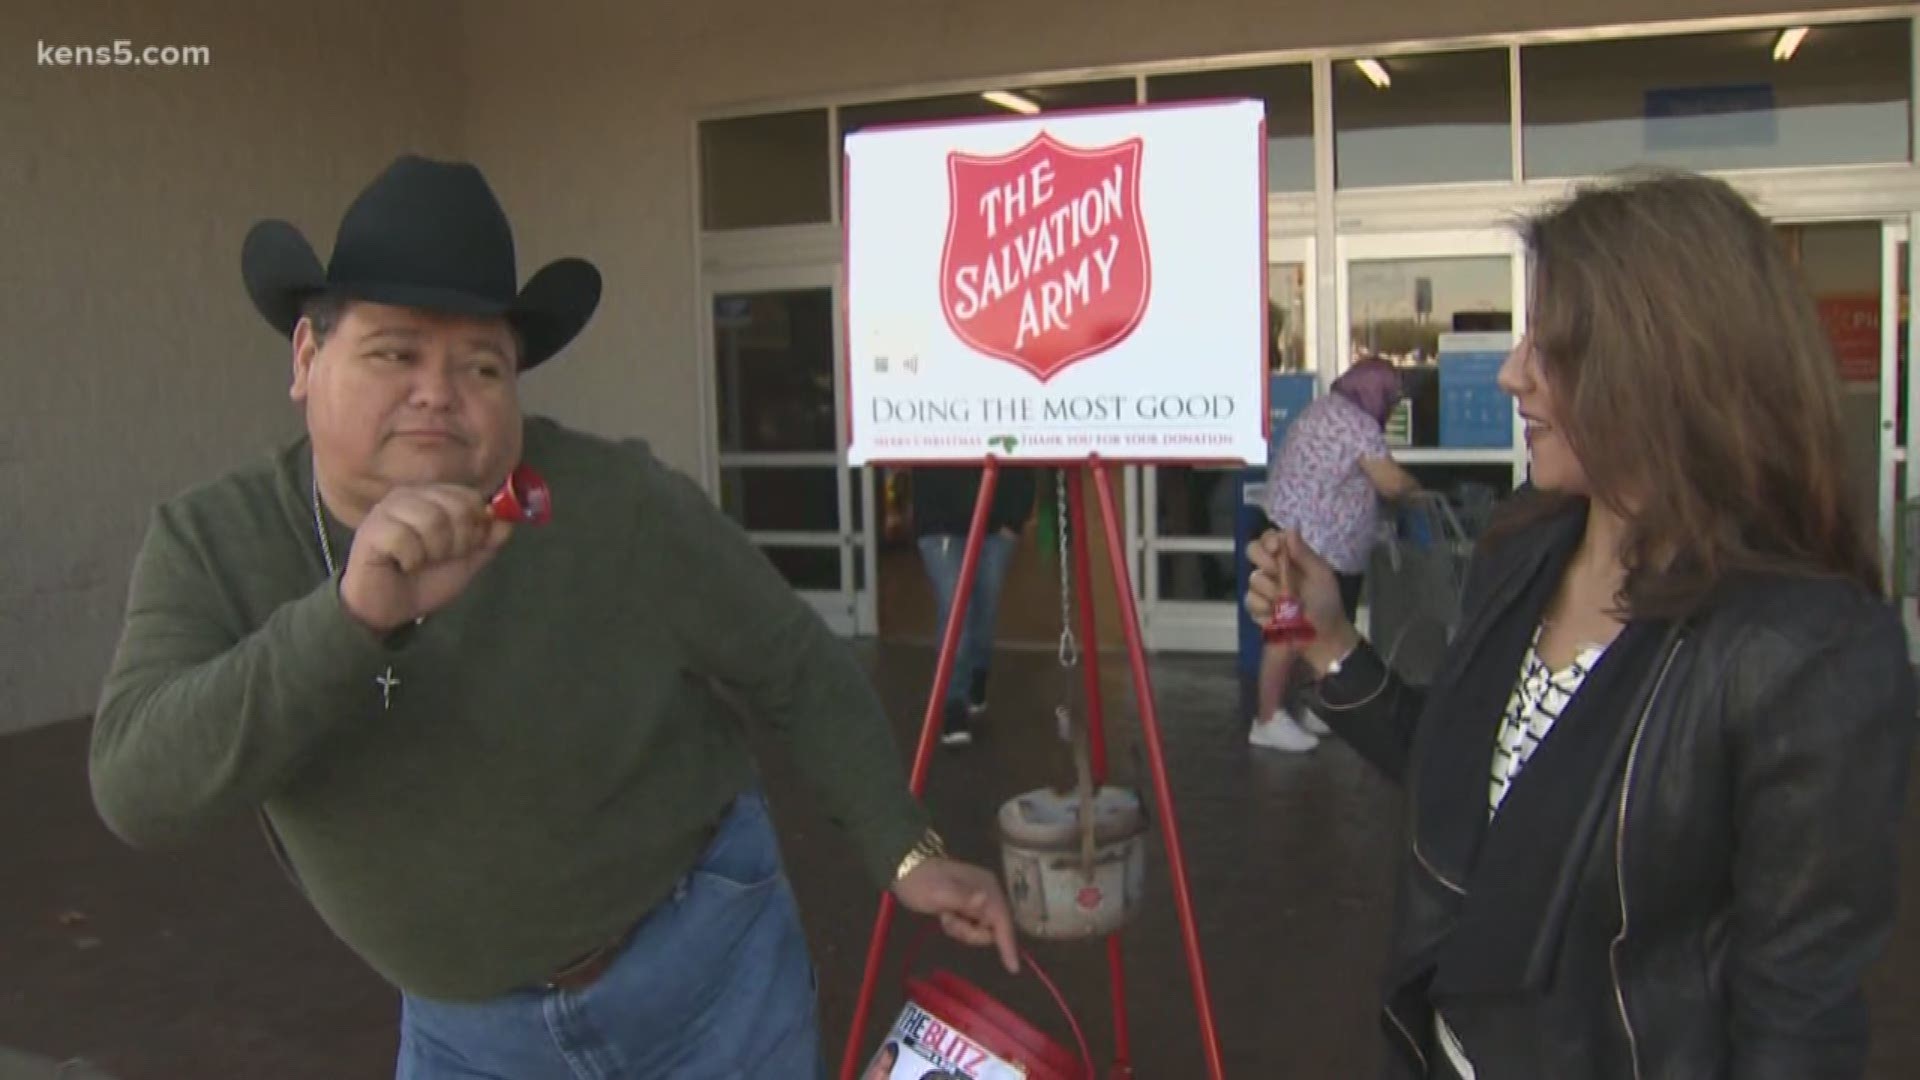 KENS 5's Sarah Forgany went up against legendary singer Raulito Navaira to raise money for the Salvation Army, raising nearly $500 in just two hours.